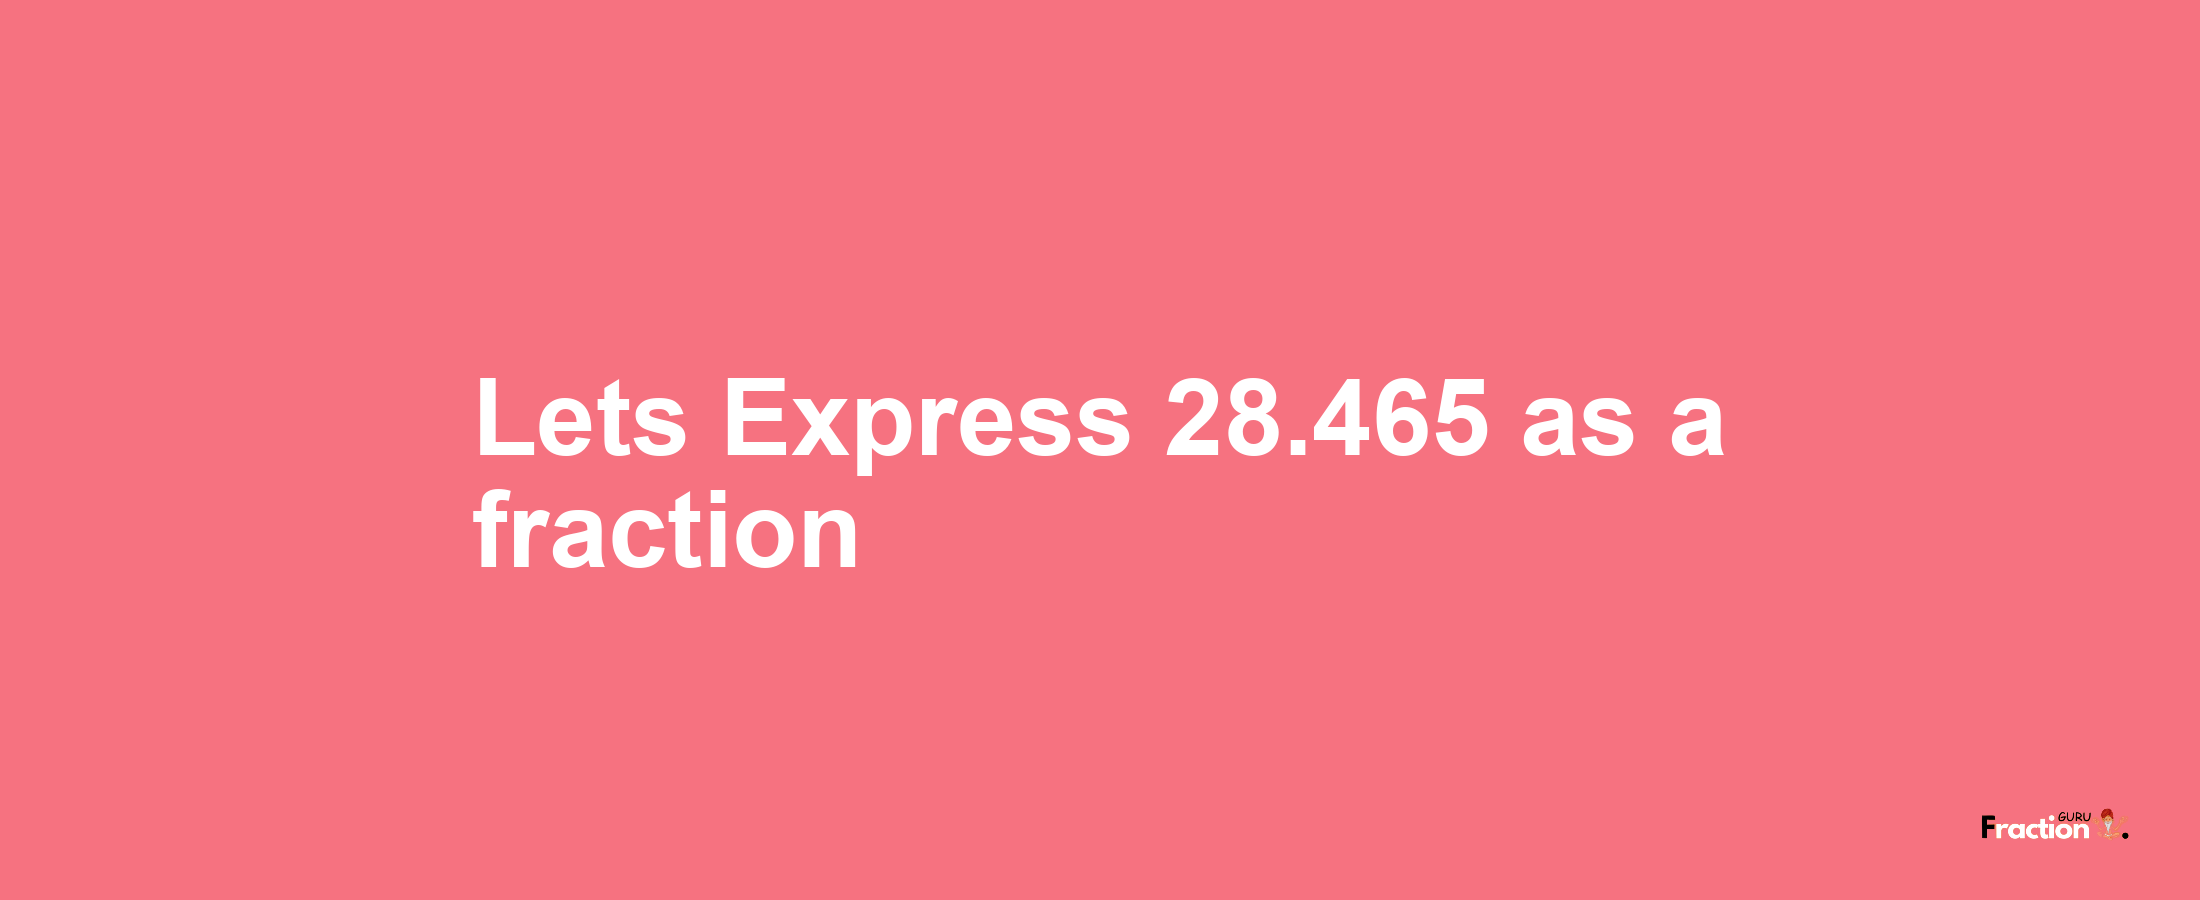 Lets Express 28.465 as afraction